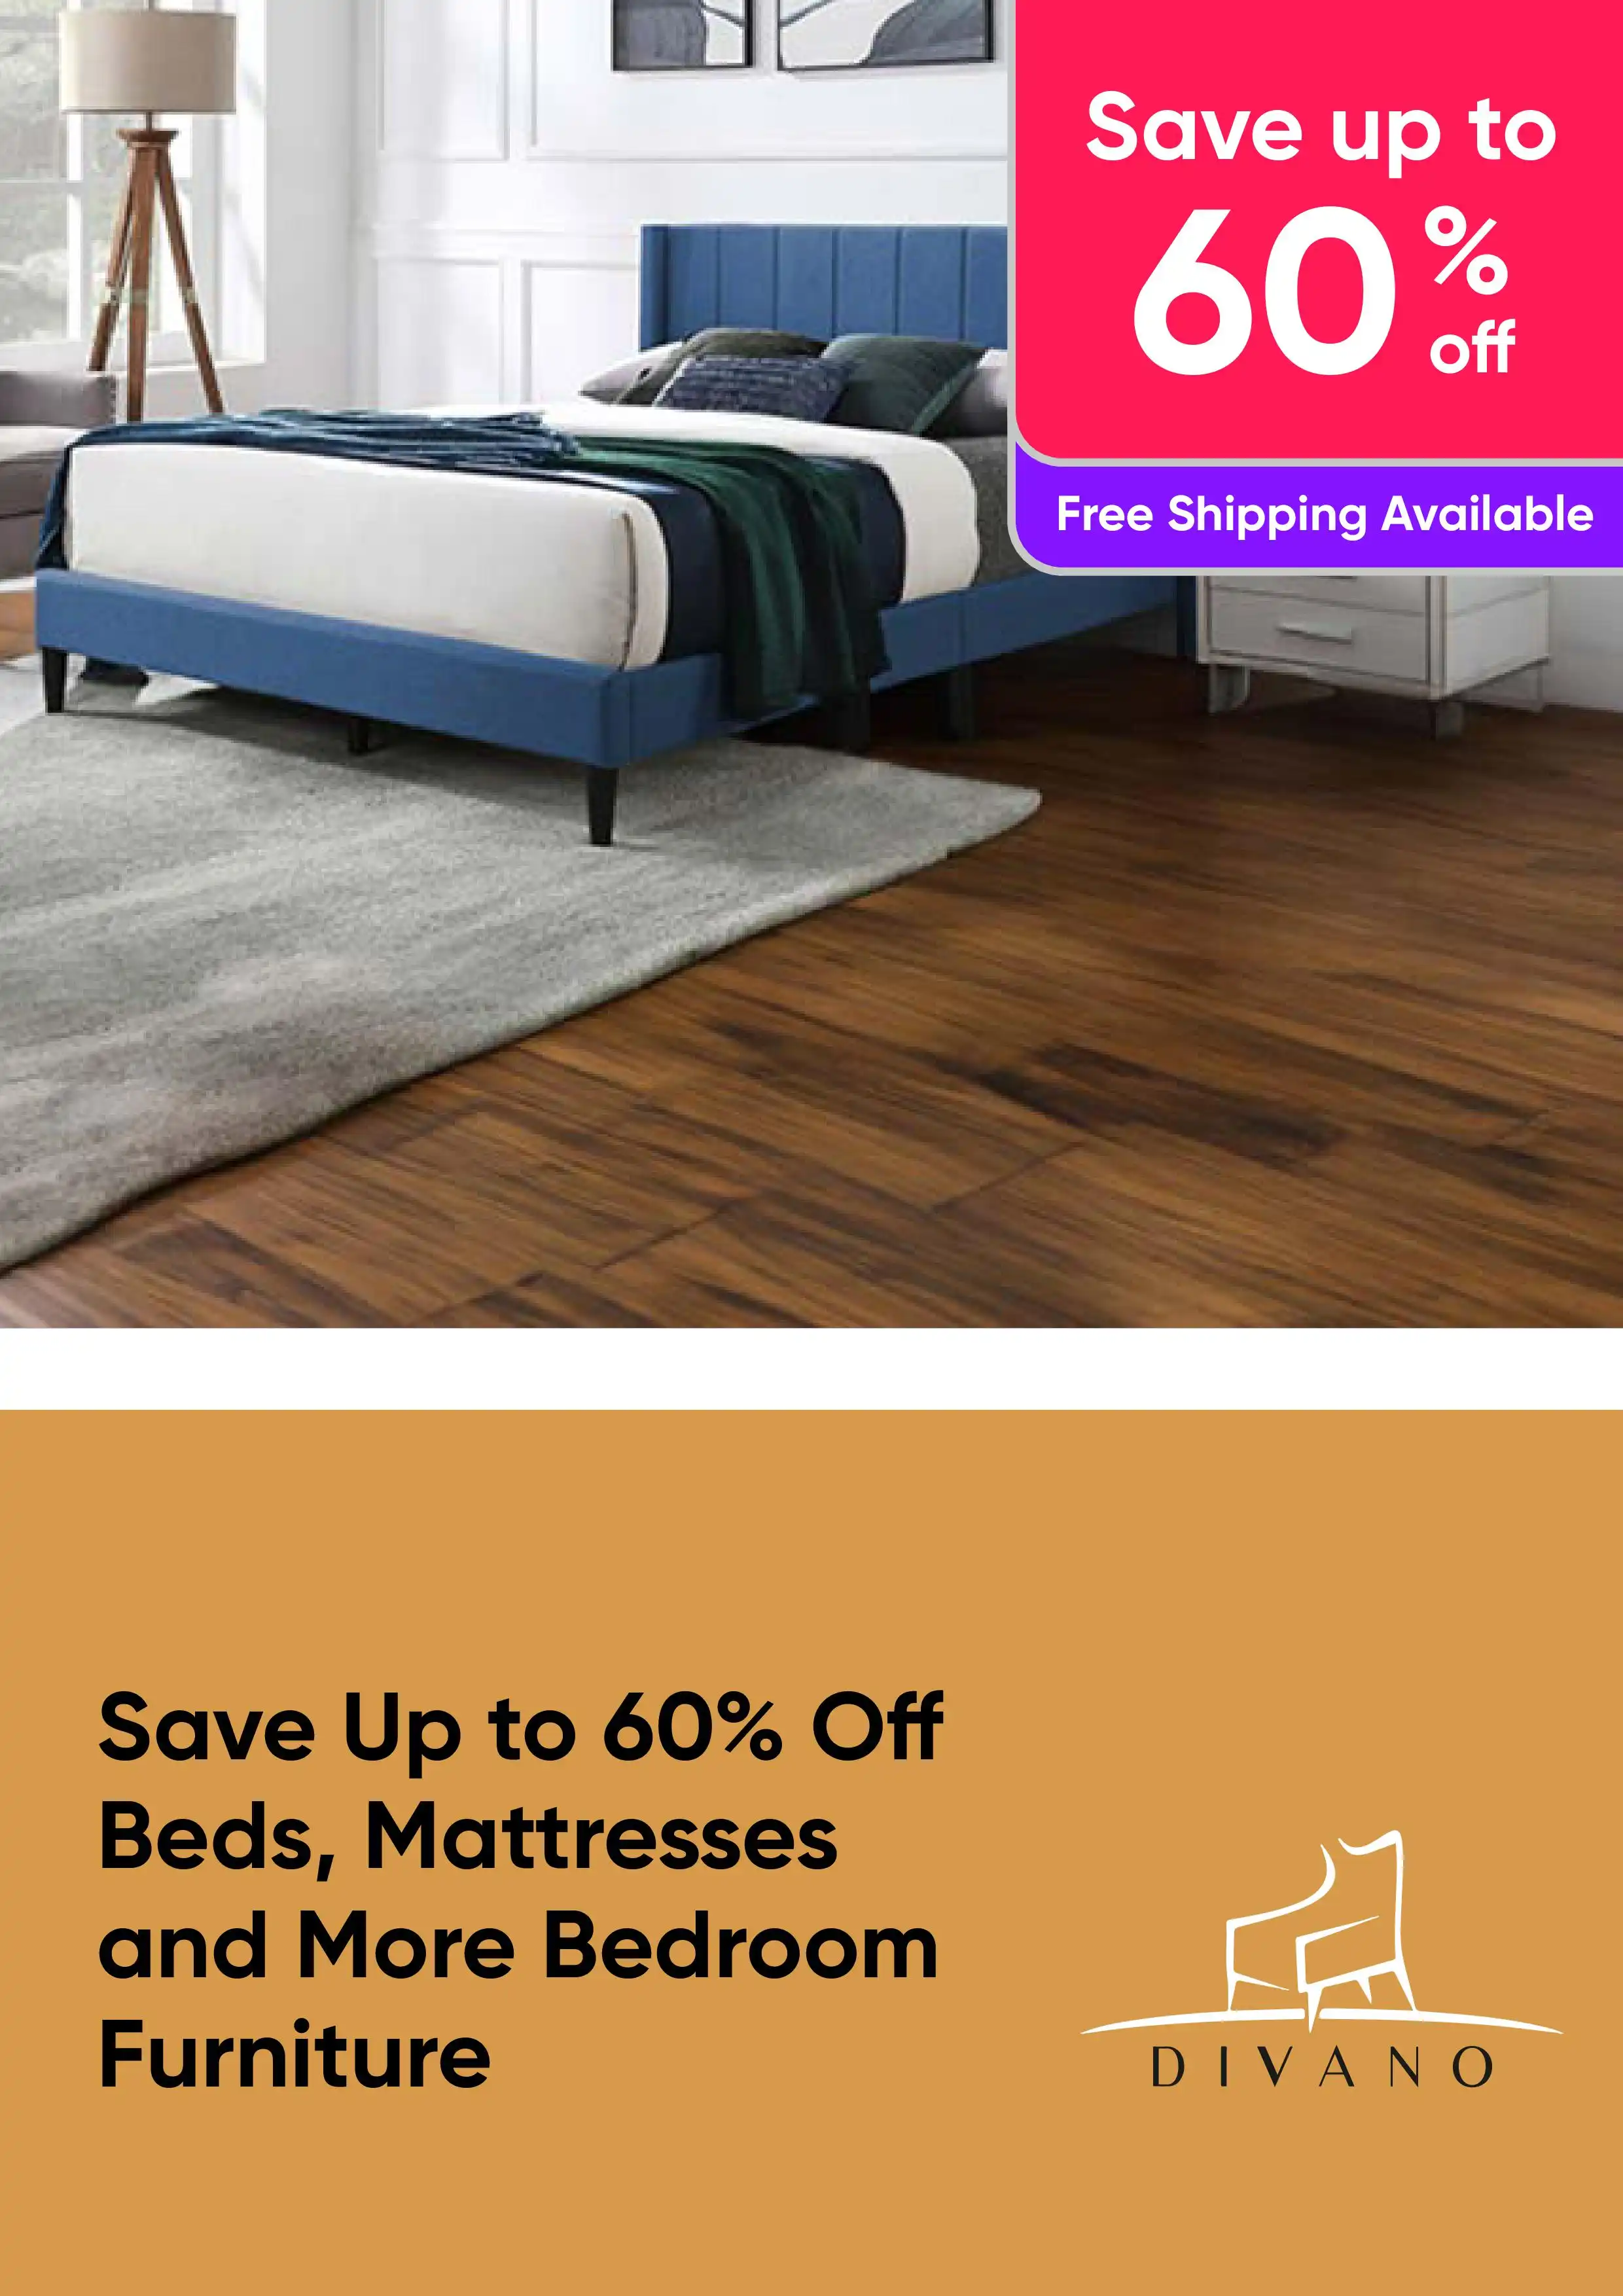 Save Up to 60% Off Beds, Mattresses and More Bedroom Furniture by Divano 